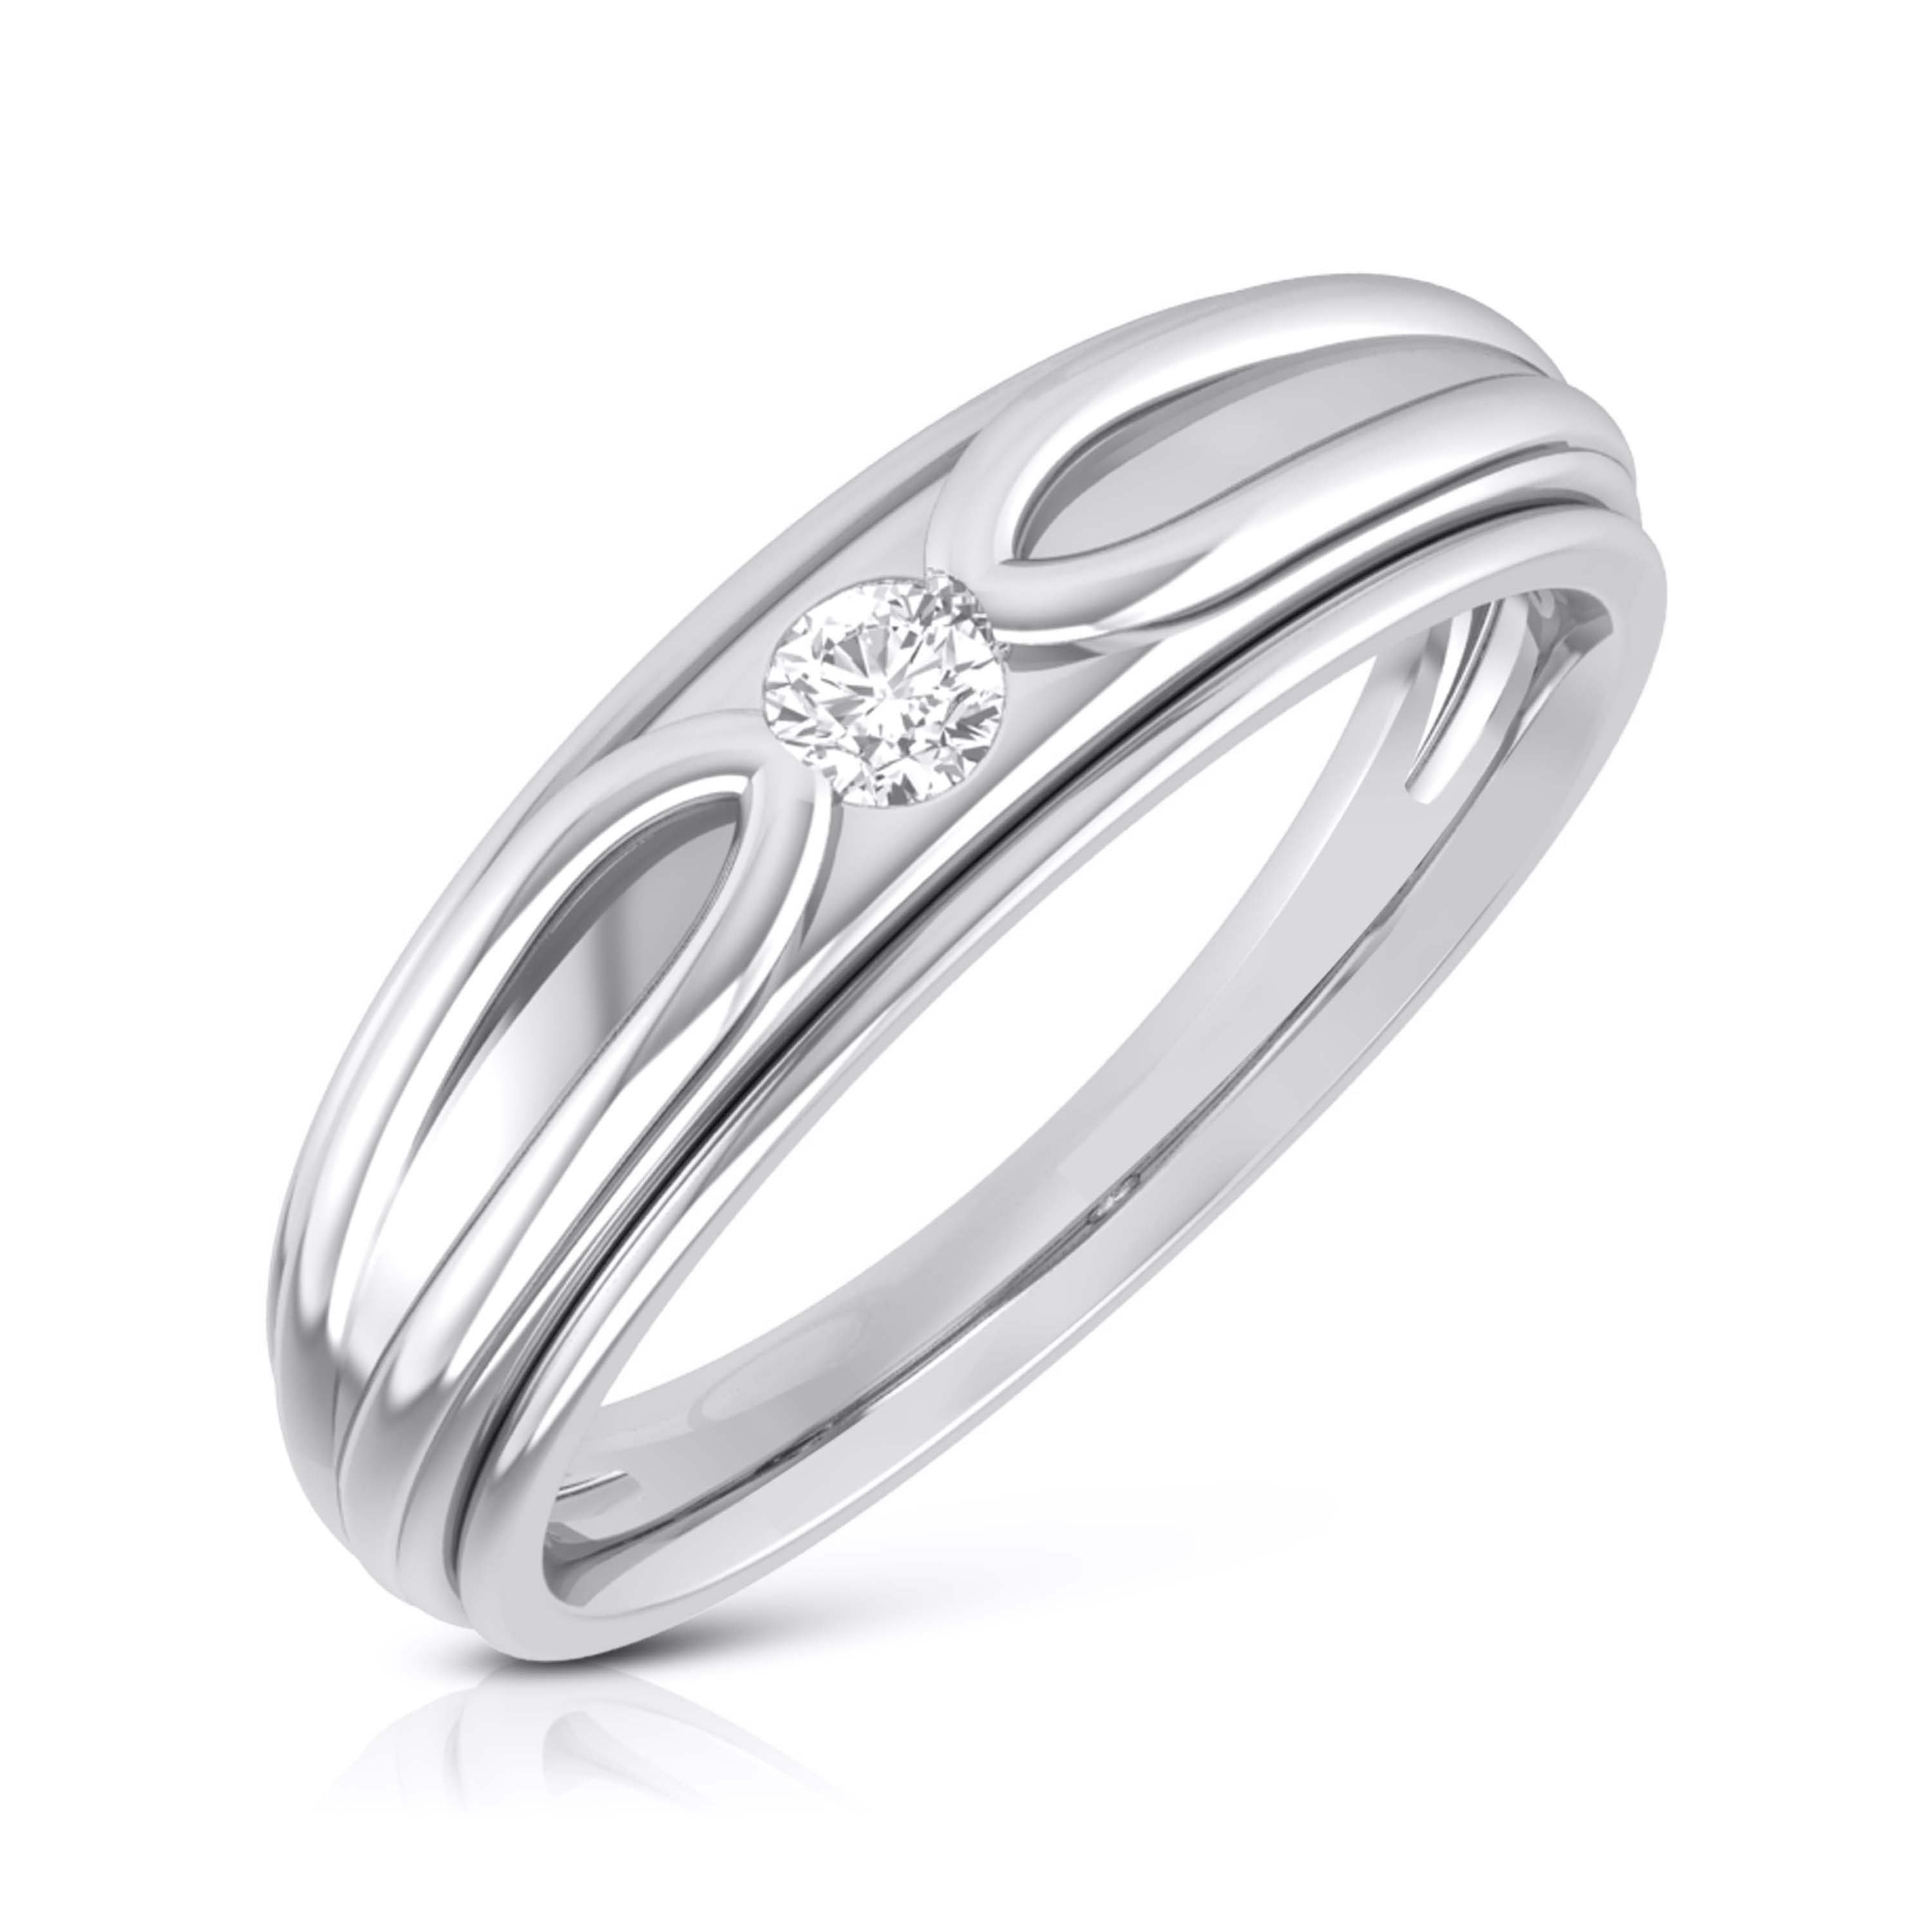 SILVOSWAN Couple Ring for Girl and Boy Adjustable Platinum Plated Silver  Rings Metal Platinum Plated Ring Set Price in India - Buy SILVOSWAN Couple  Ring for Girl and Boy Adjustable Platinum Plated